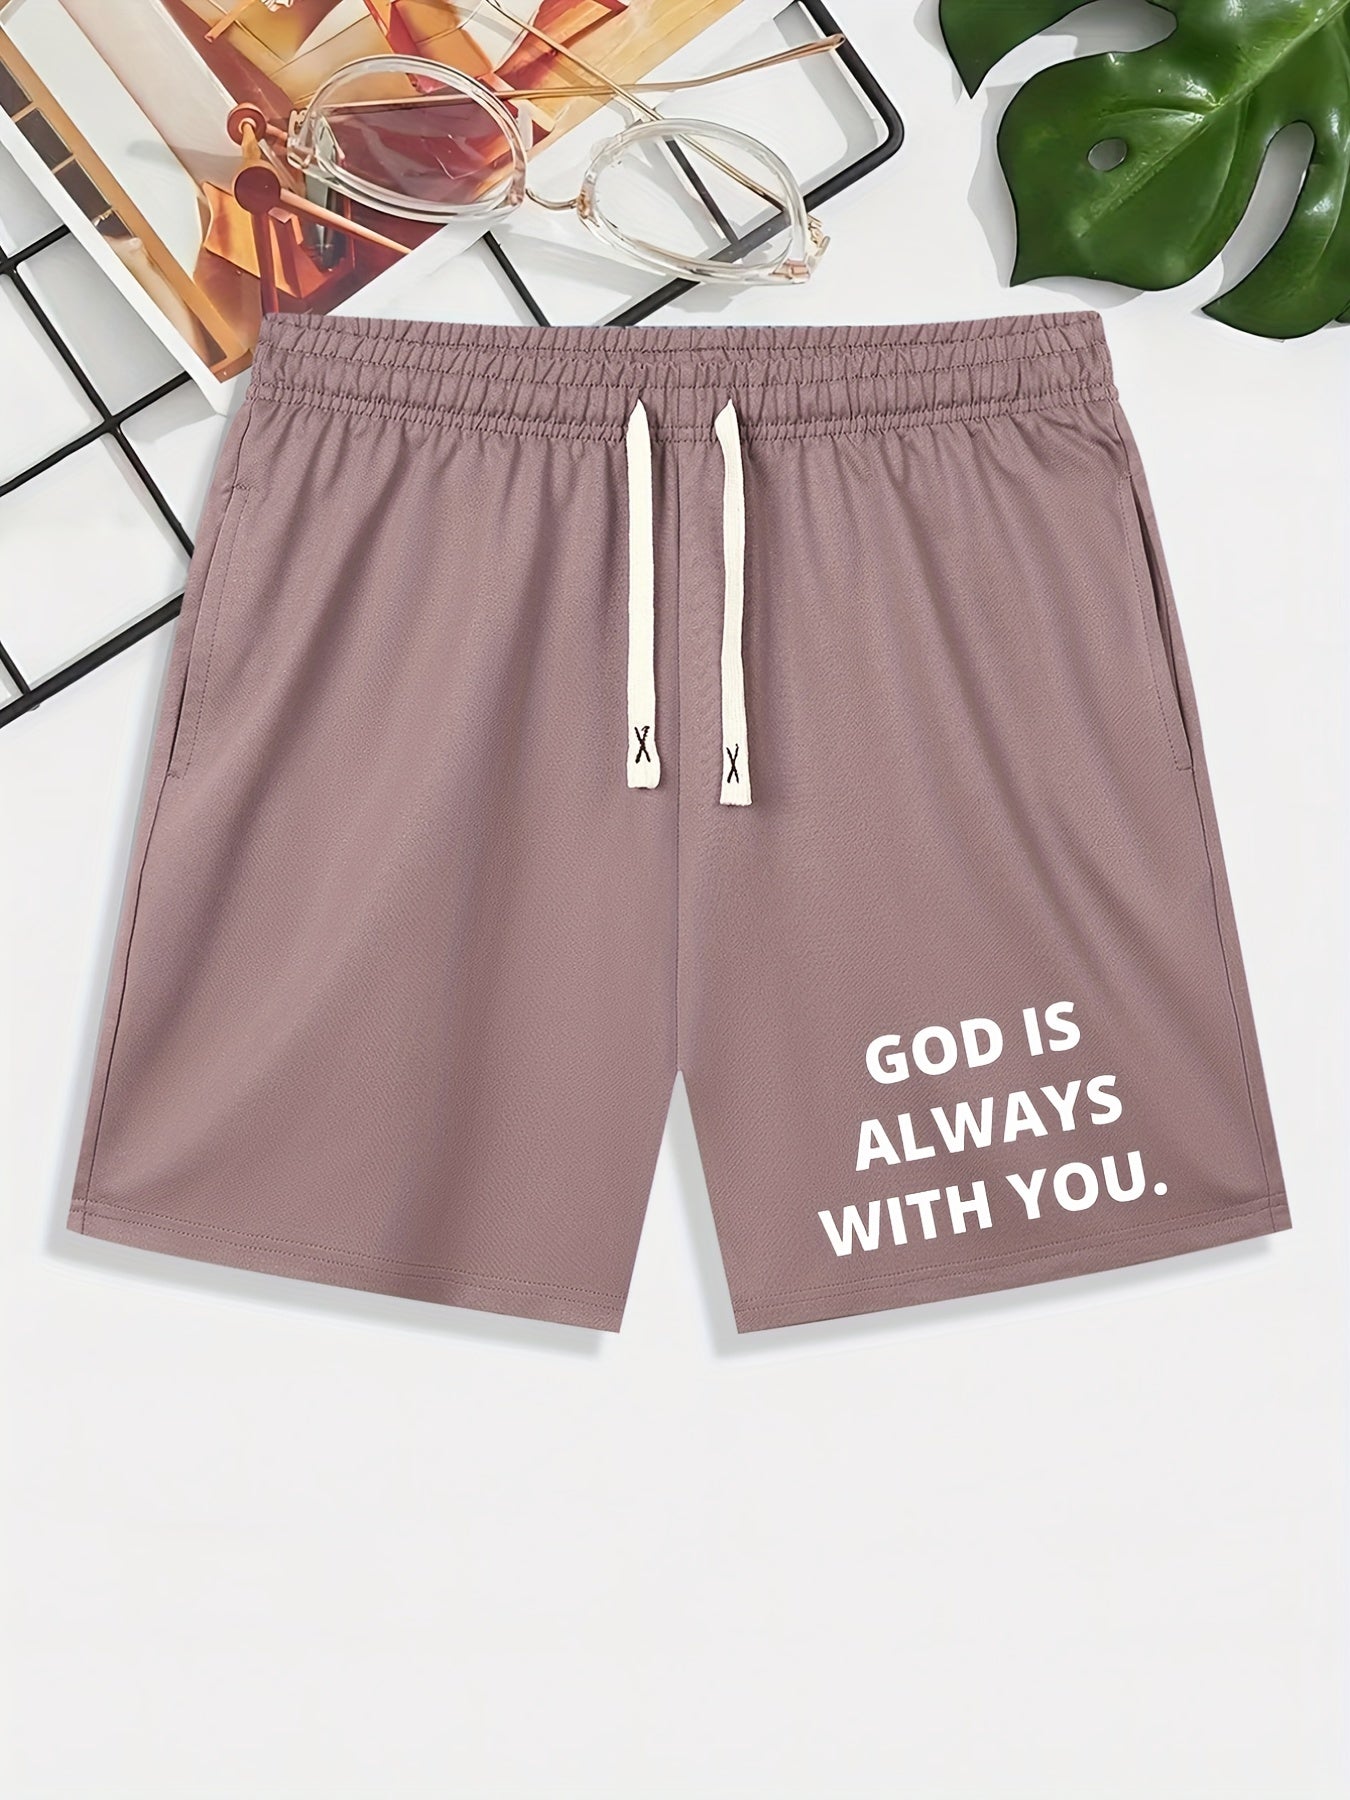 GOD IS ALWAYS WITH YOU Men's Christian Shorts claimedbygoddesigns